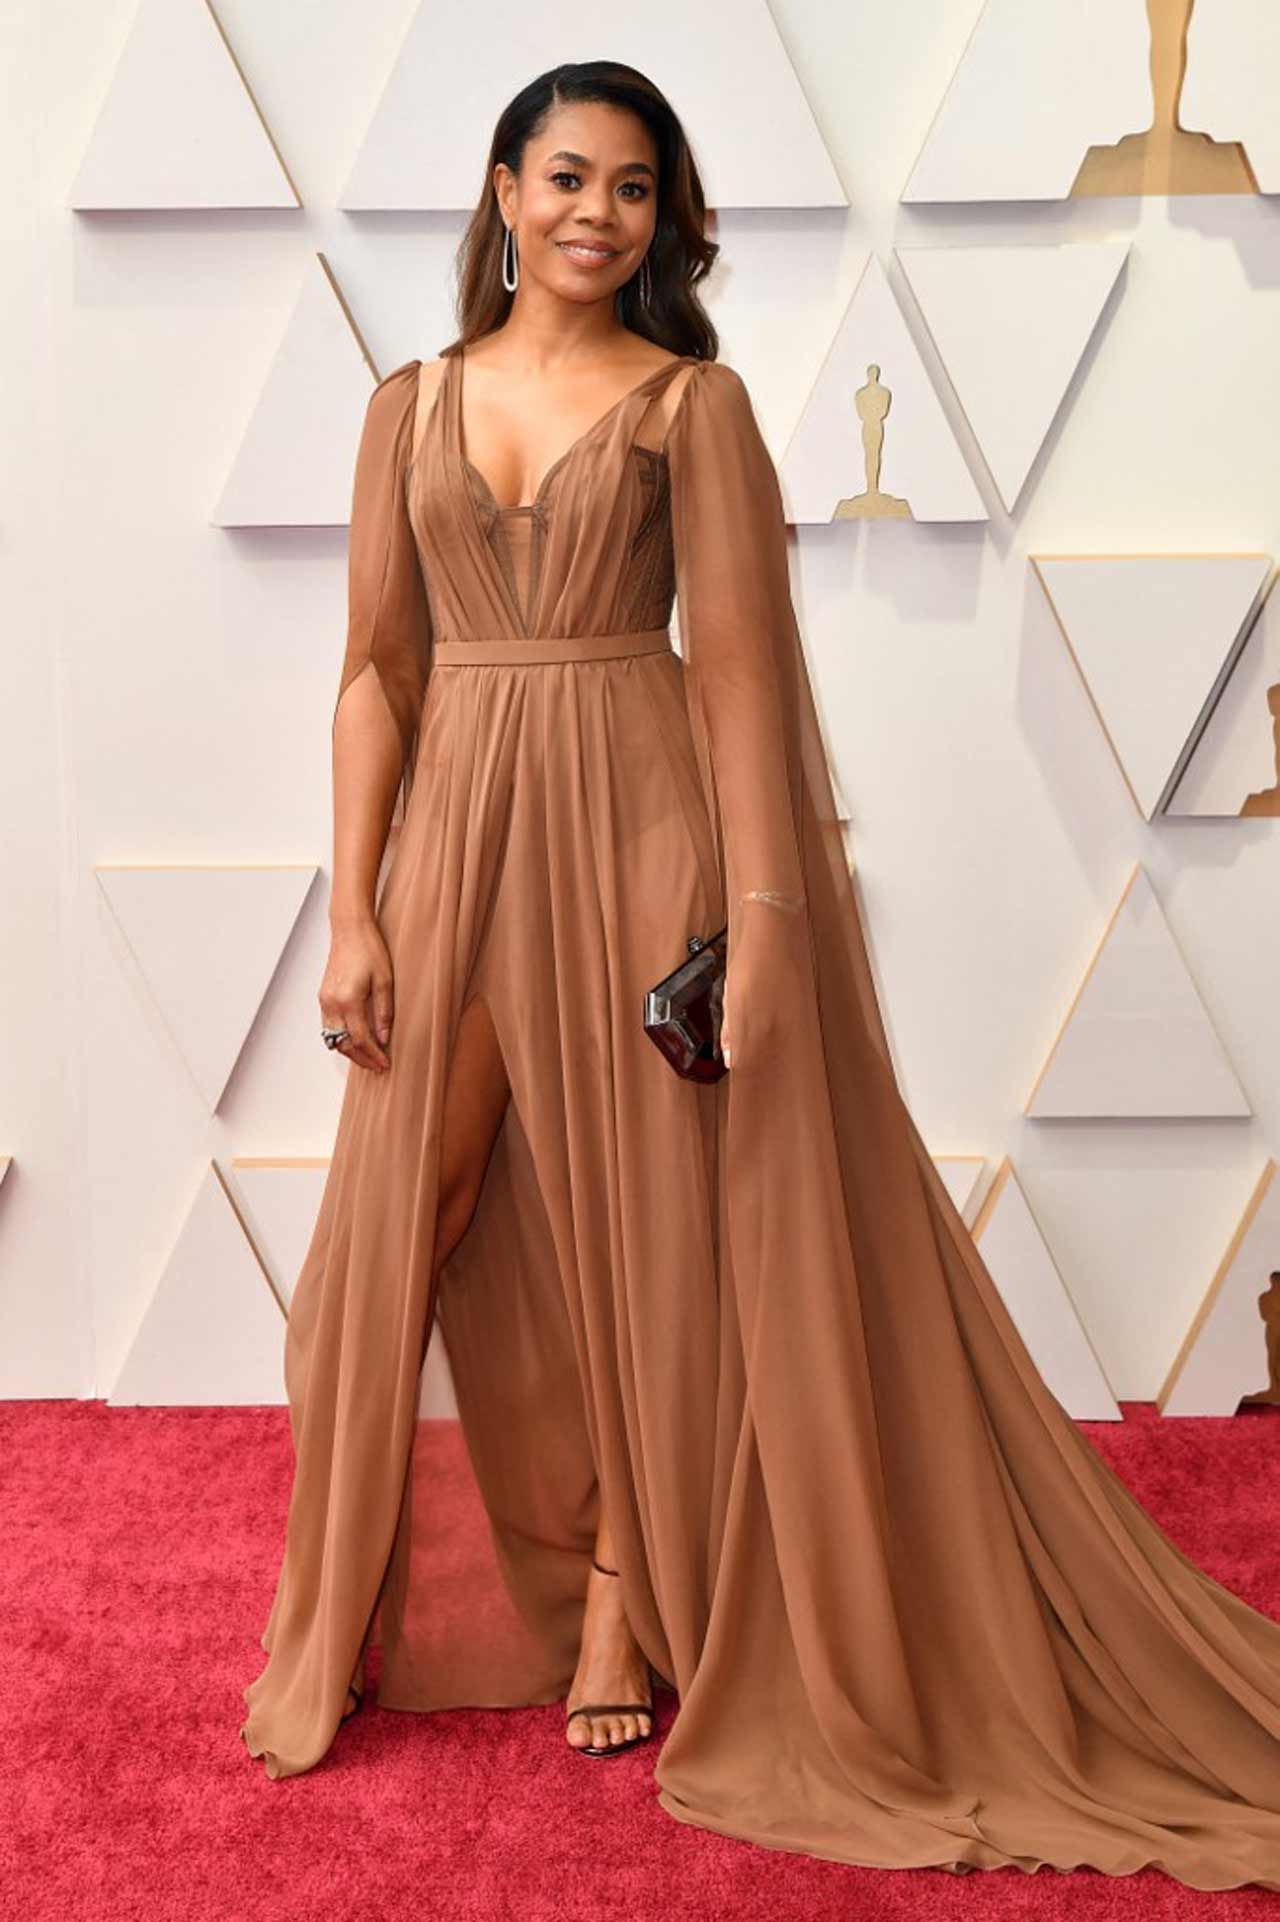 Oscar host Regina Hall sported a toffee-coloured gown with dramatic sheer sleeves.